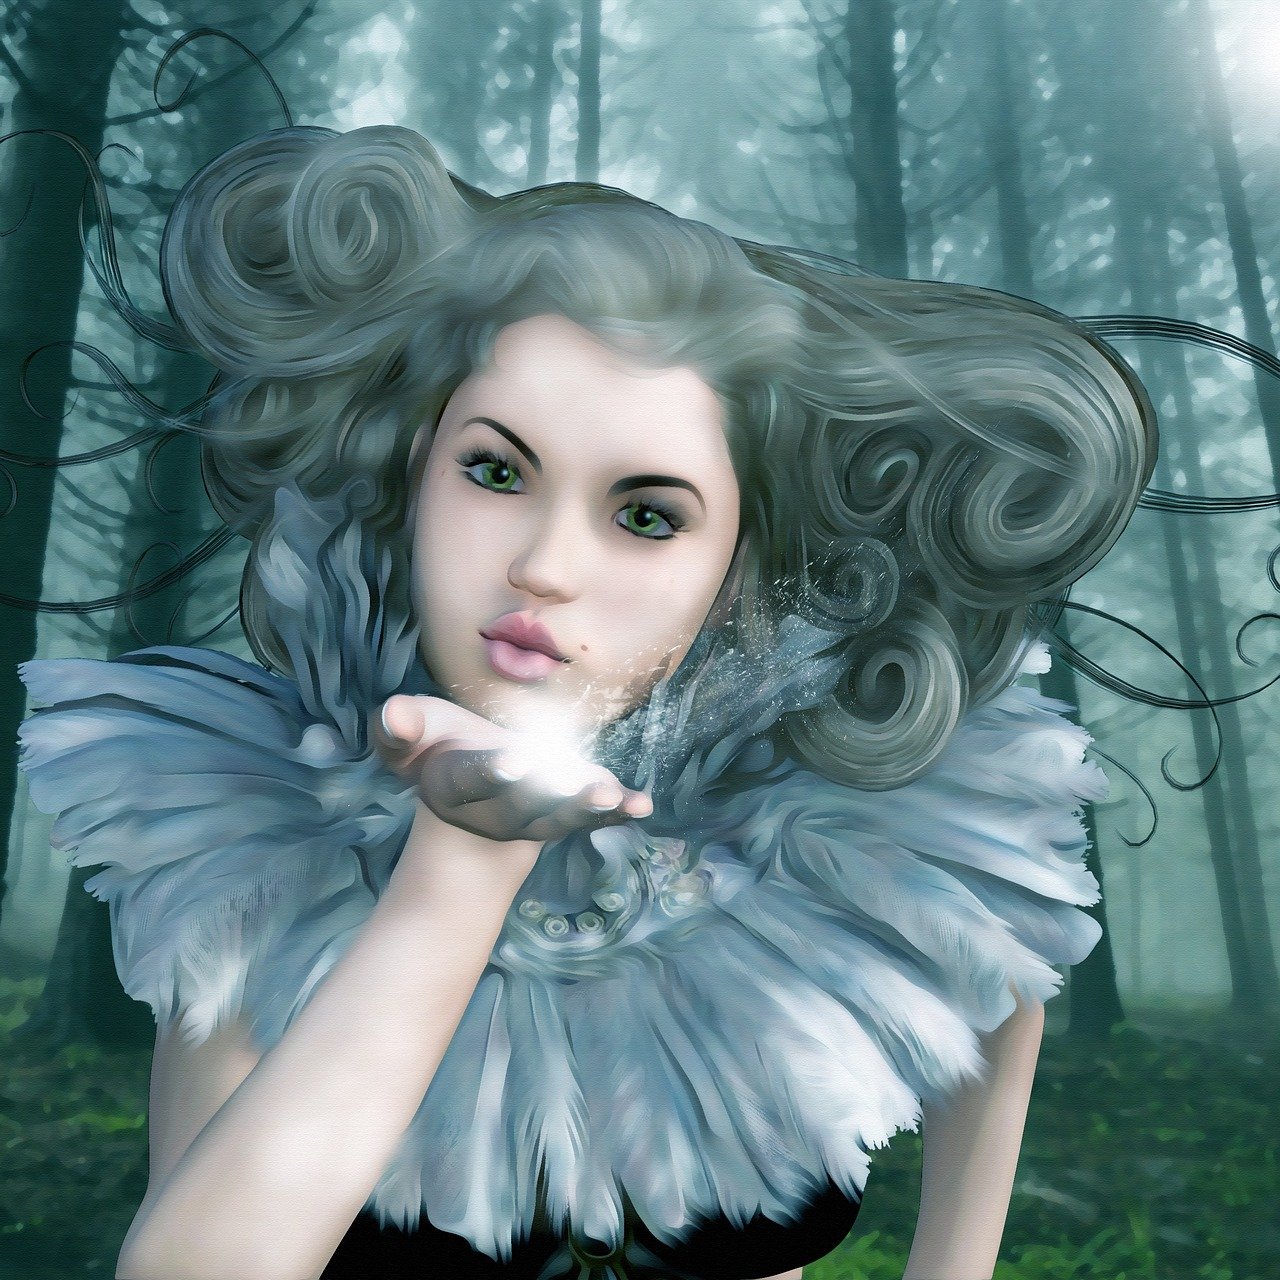 a digital painting of a woman in a forest, an airbrush painting, inspired by Nene Thomas, fantasy art, white feathers, fleshy creature above her mouth, romantic storybook fantasy, mime